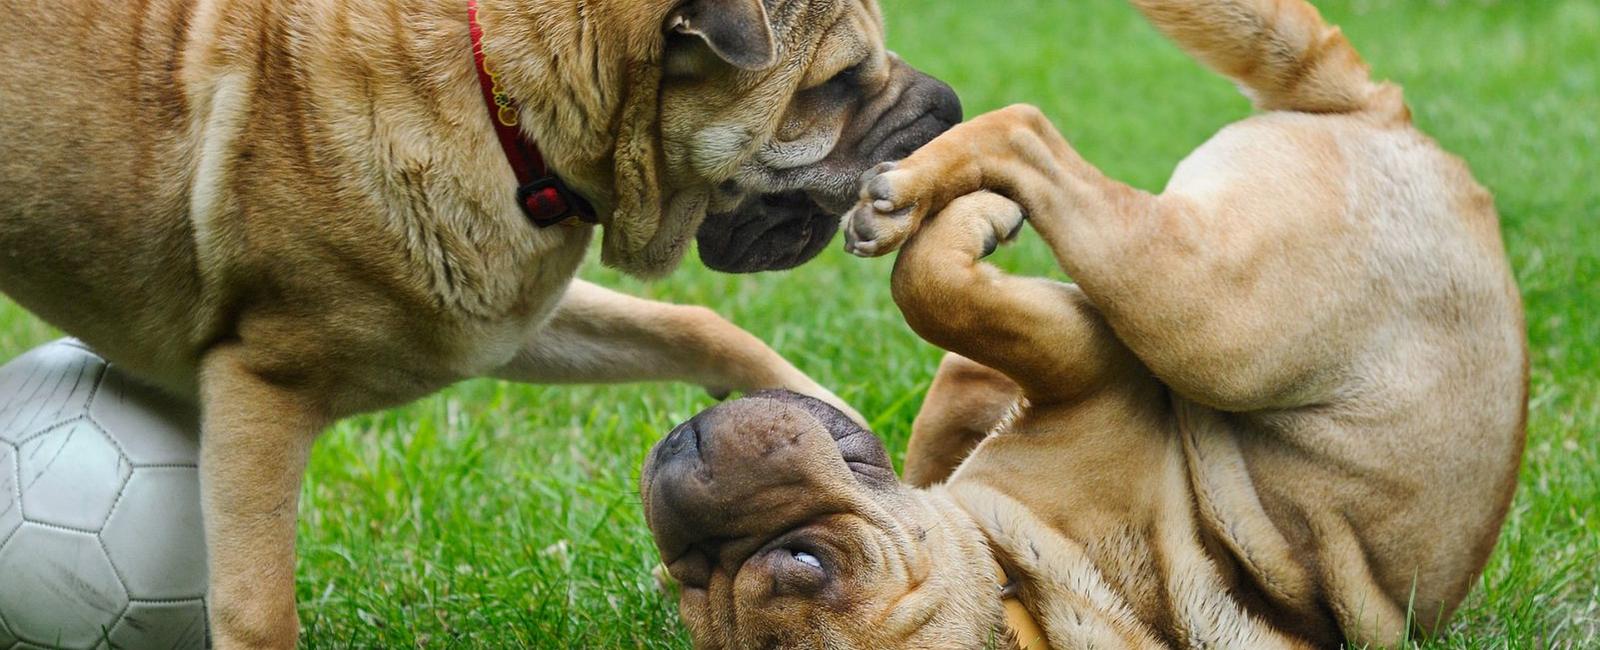 Why Dogs Lick Each Others’ Private Areas